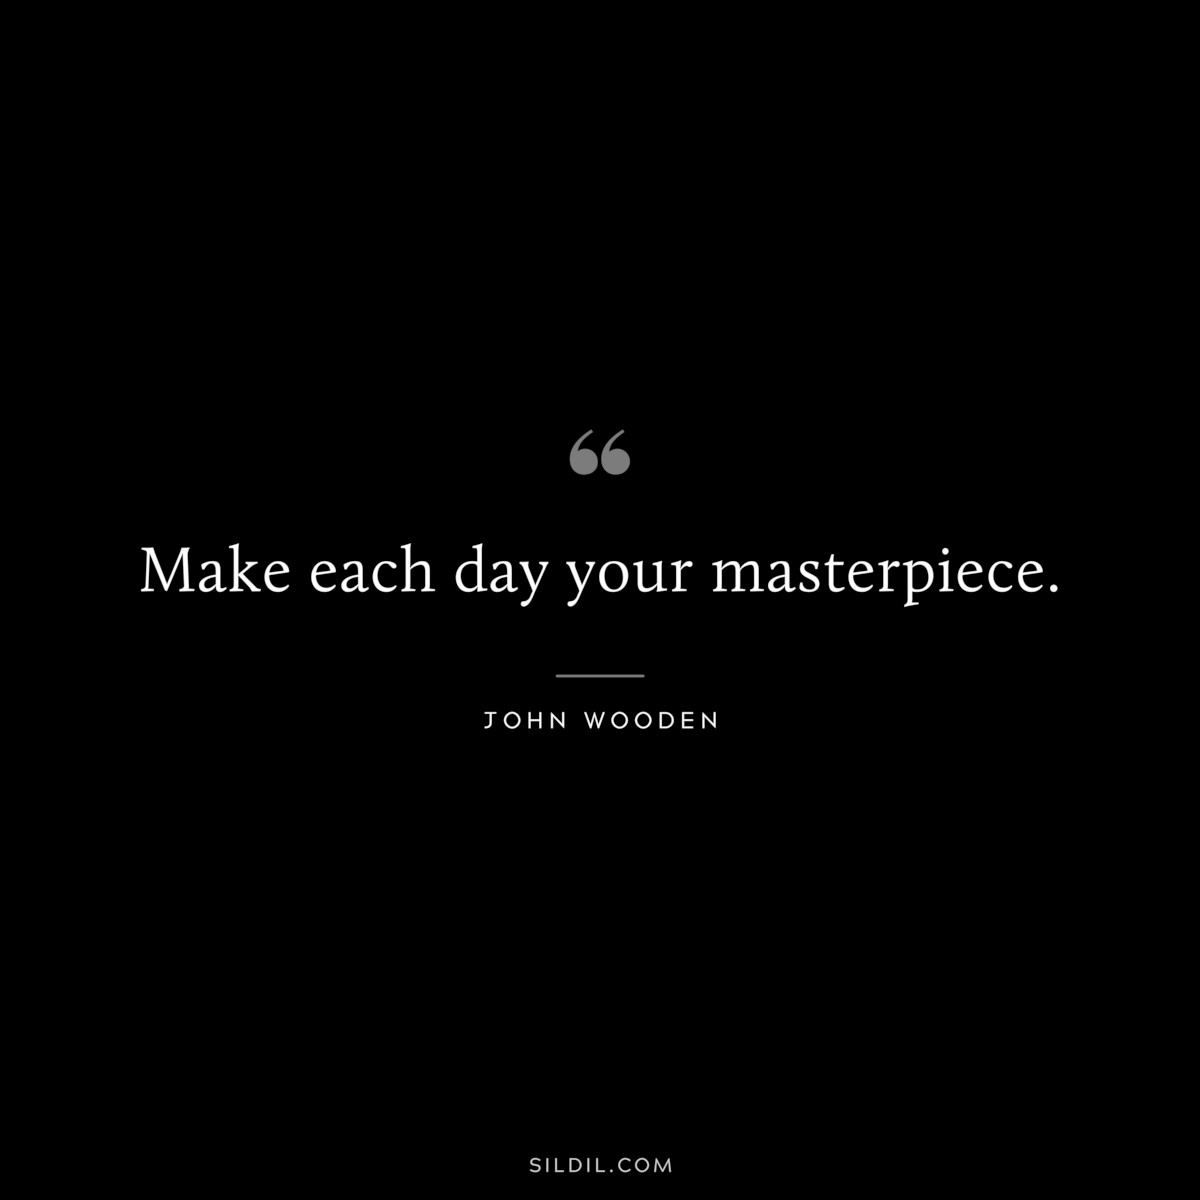 Make each day your masterpiece. ― John Wooden